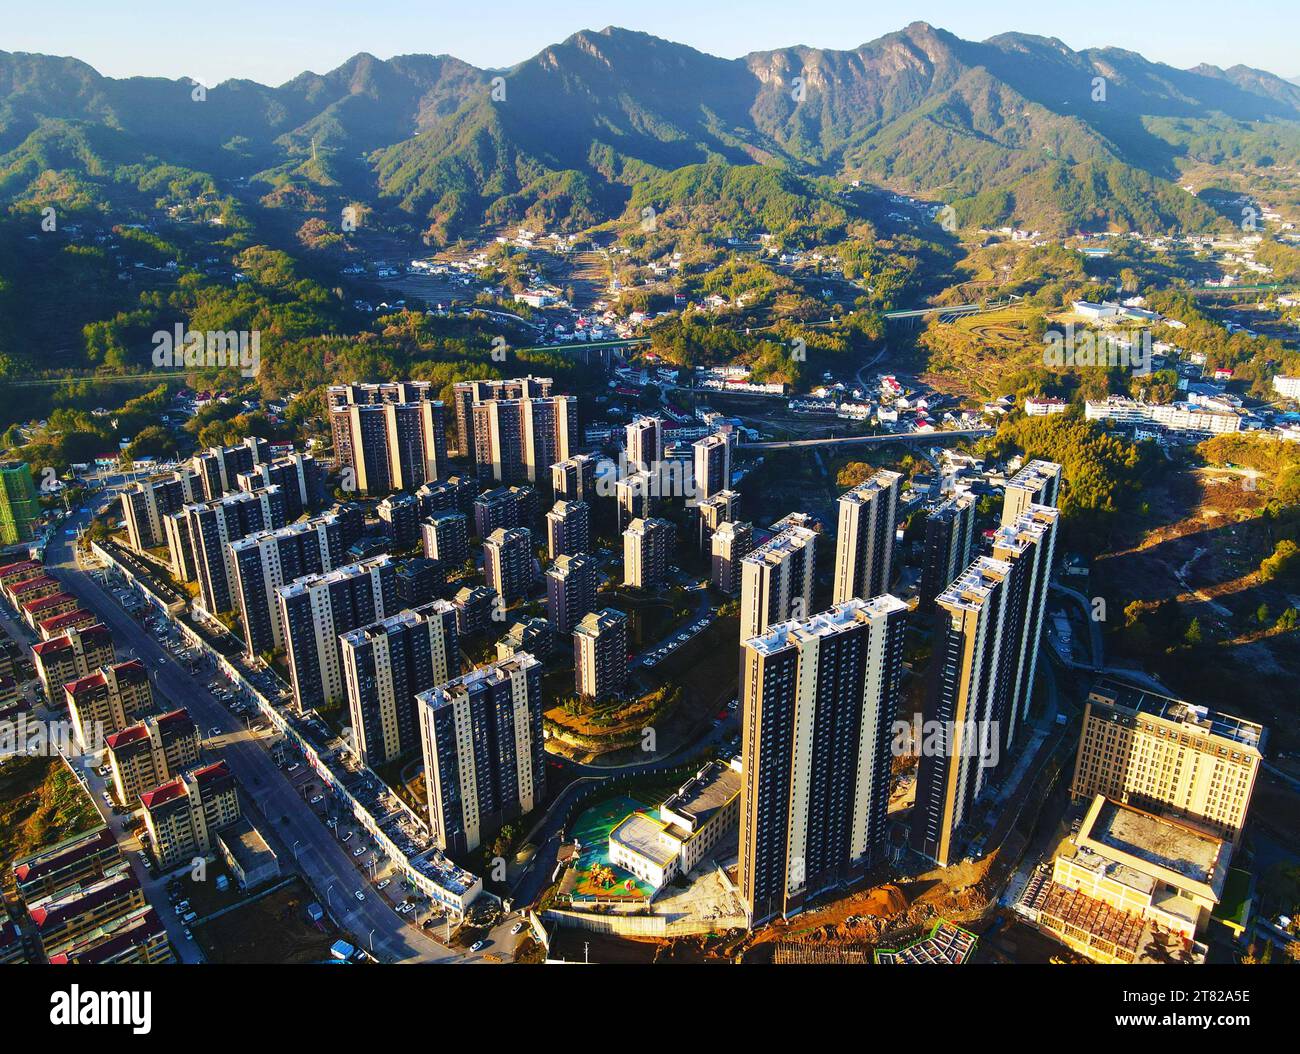 ANQING, CHINA - NOVEMBER 18, 2023 - A residential community in the mountains of Yuexi County, Anqing City, Anhui province, China, November 18, 2023. Stock Photo